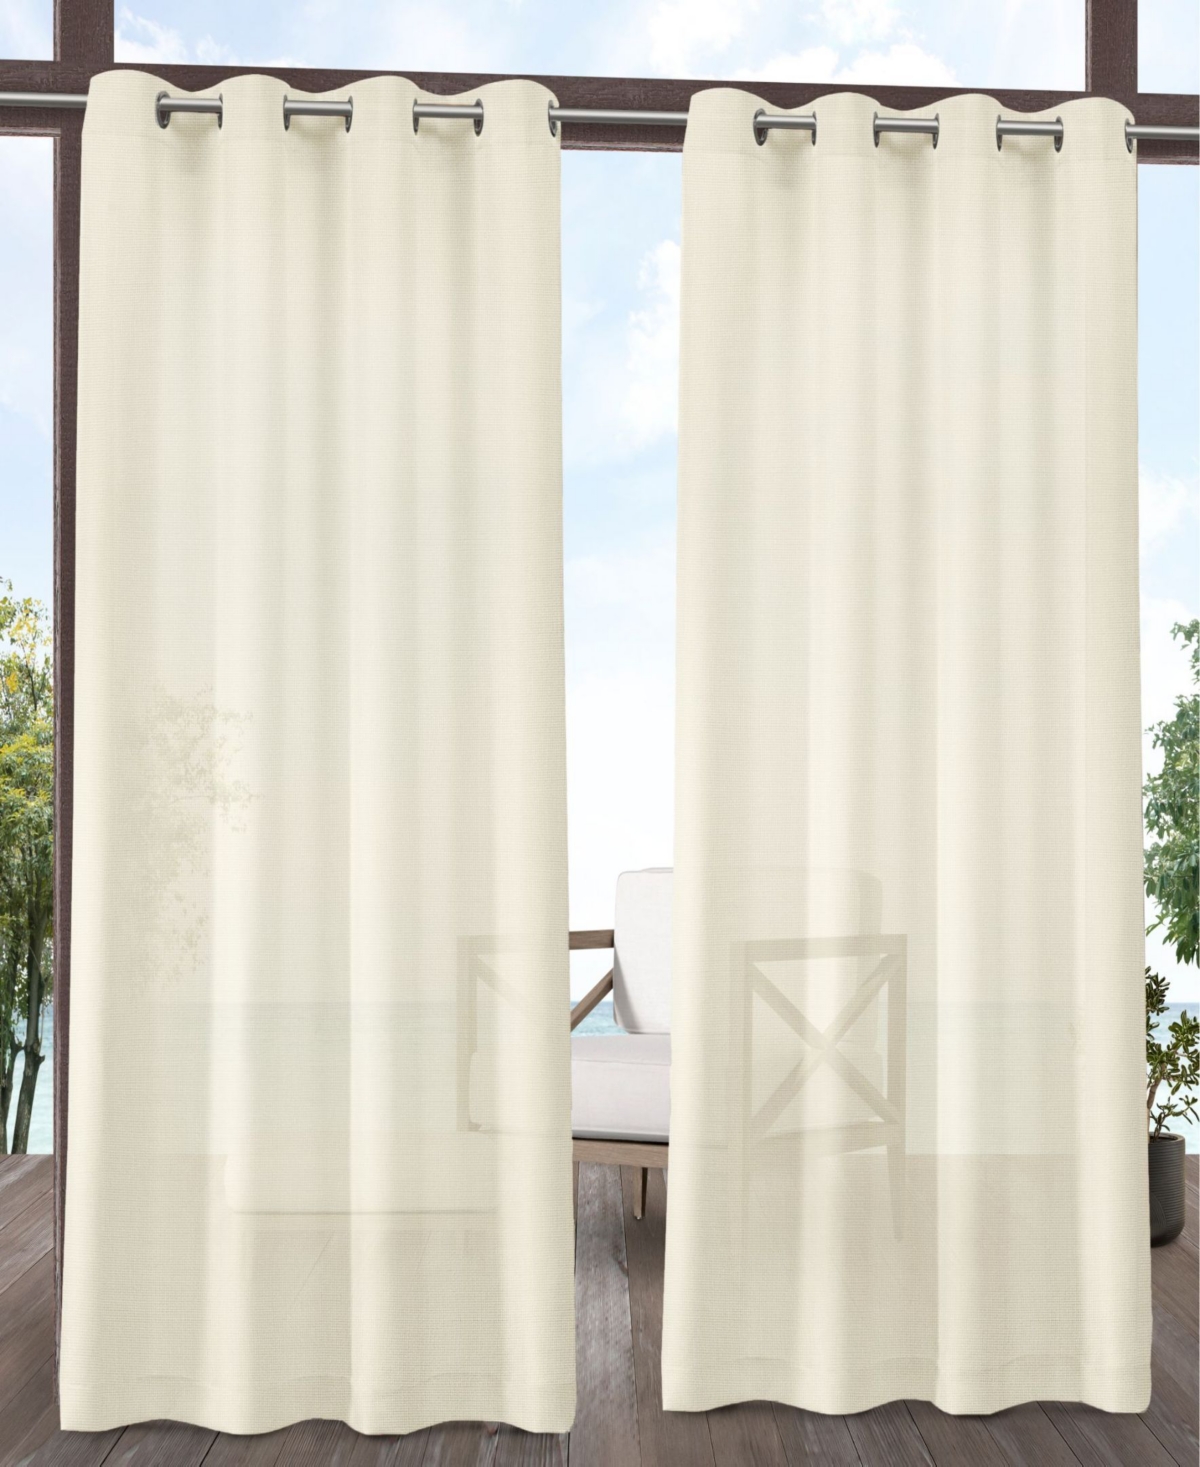 Curtains Miami Textured Indoor - Outdoor Grommet Top Curtain Panel Pair, 54" x 108" - Ivory